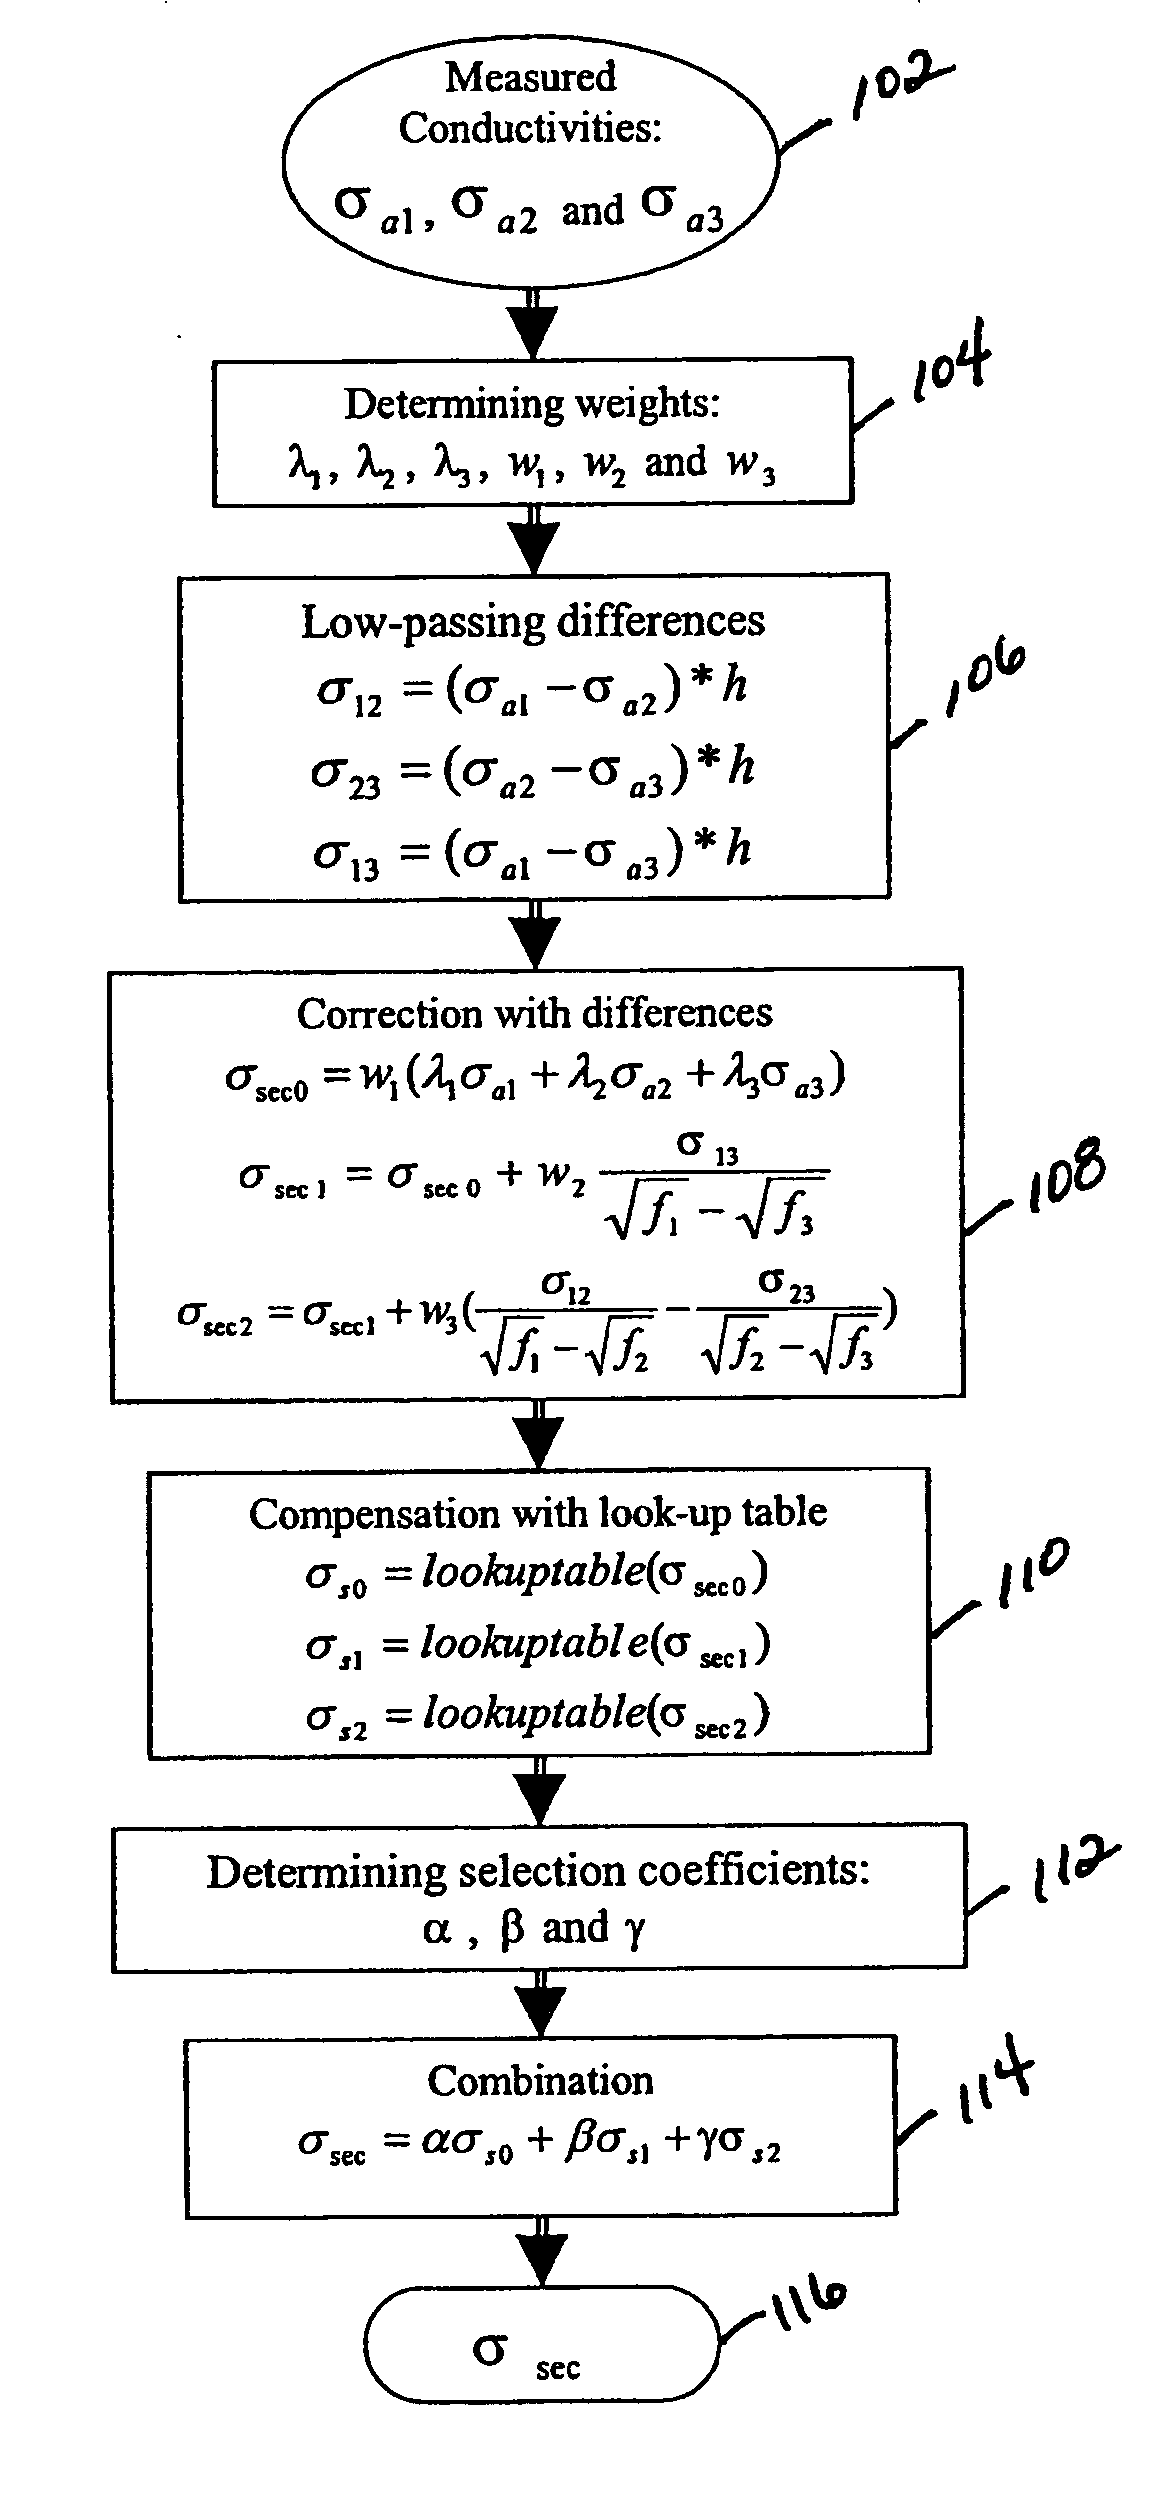 Induction logging system and method featuring multi-frequency skin effect correction